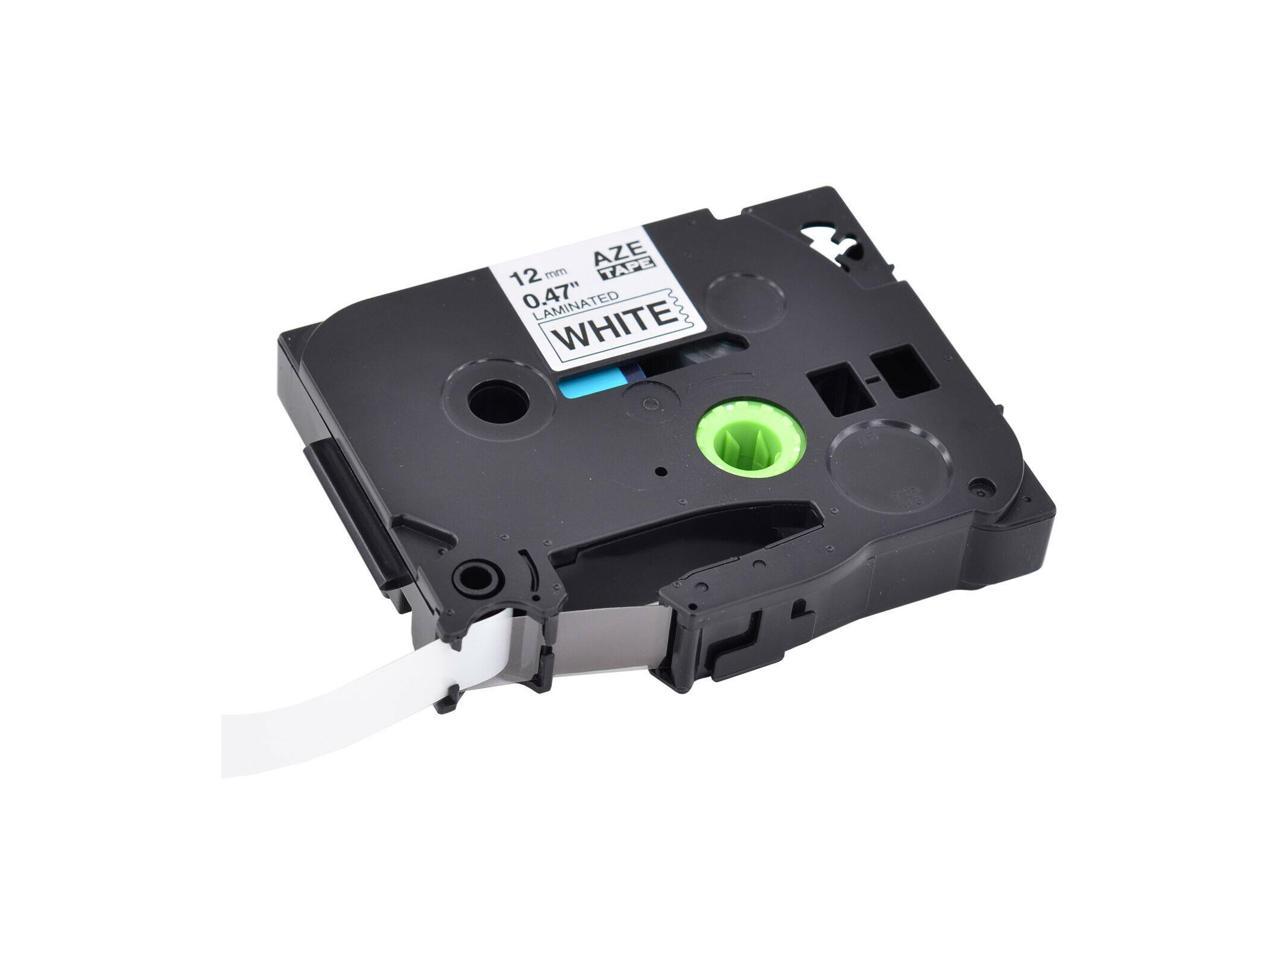 20x Compatible with TZ-231 Black on White Label Tape for Brother P-Touch PT-D450 